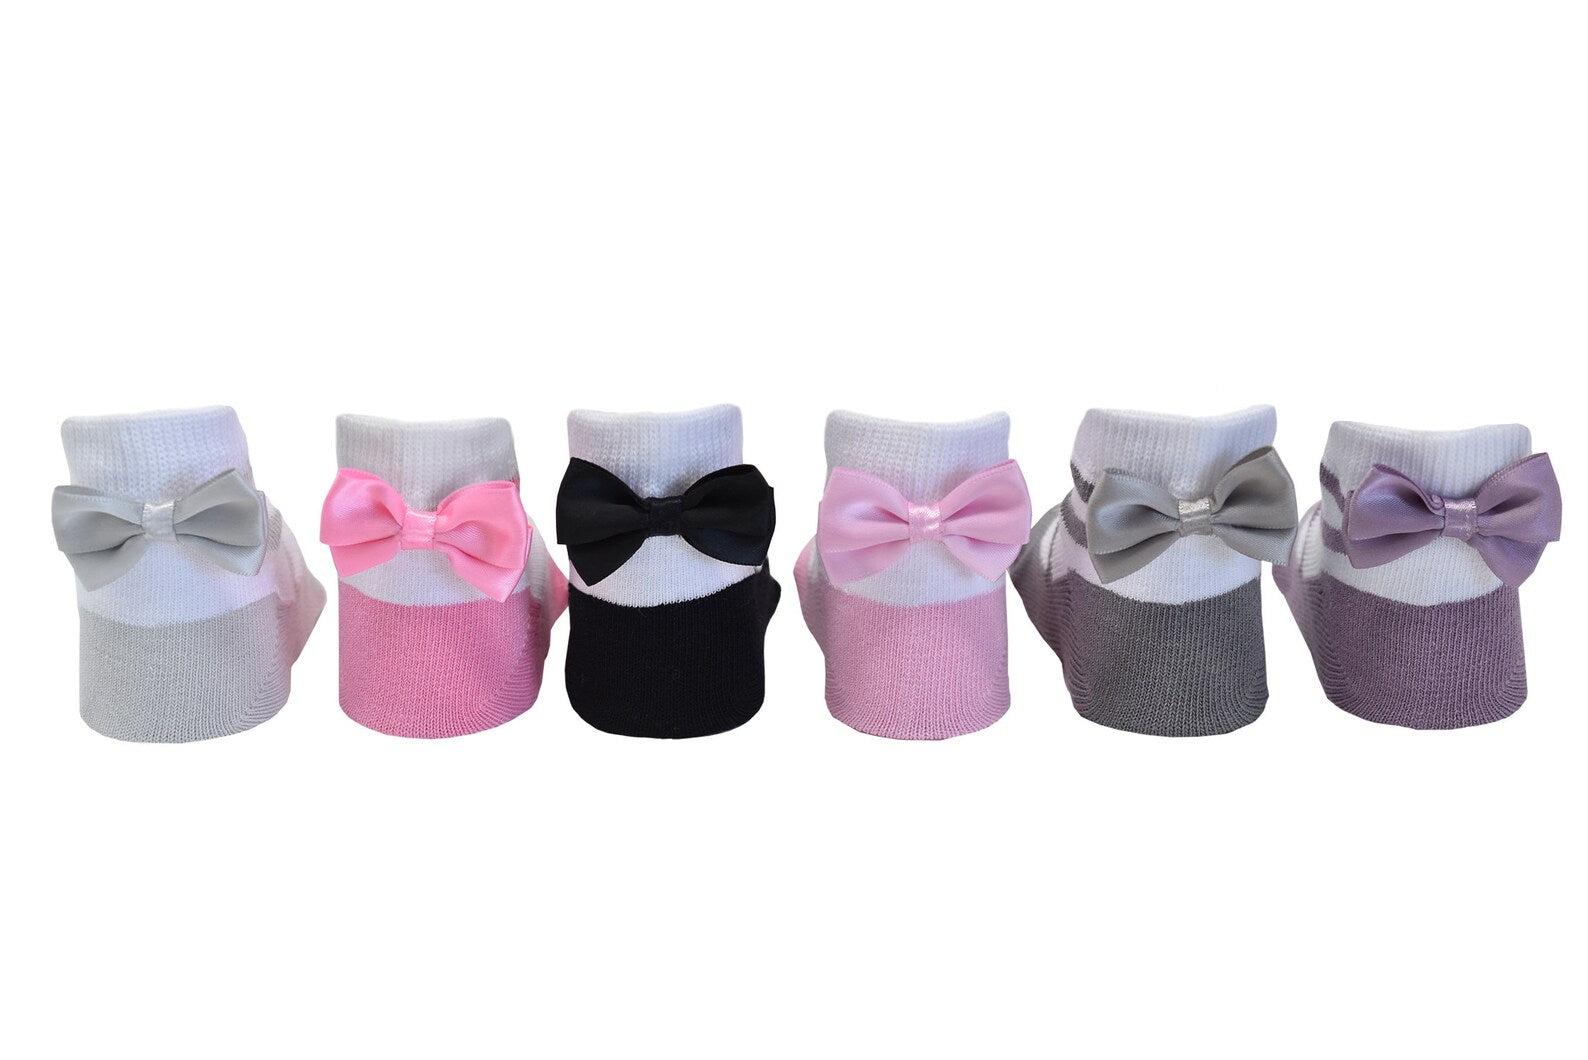 PINK ballerina shoe-design socks with satin bows and anti-slip soles. –  Baby Emporio